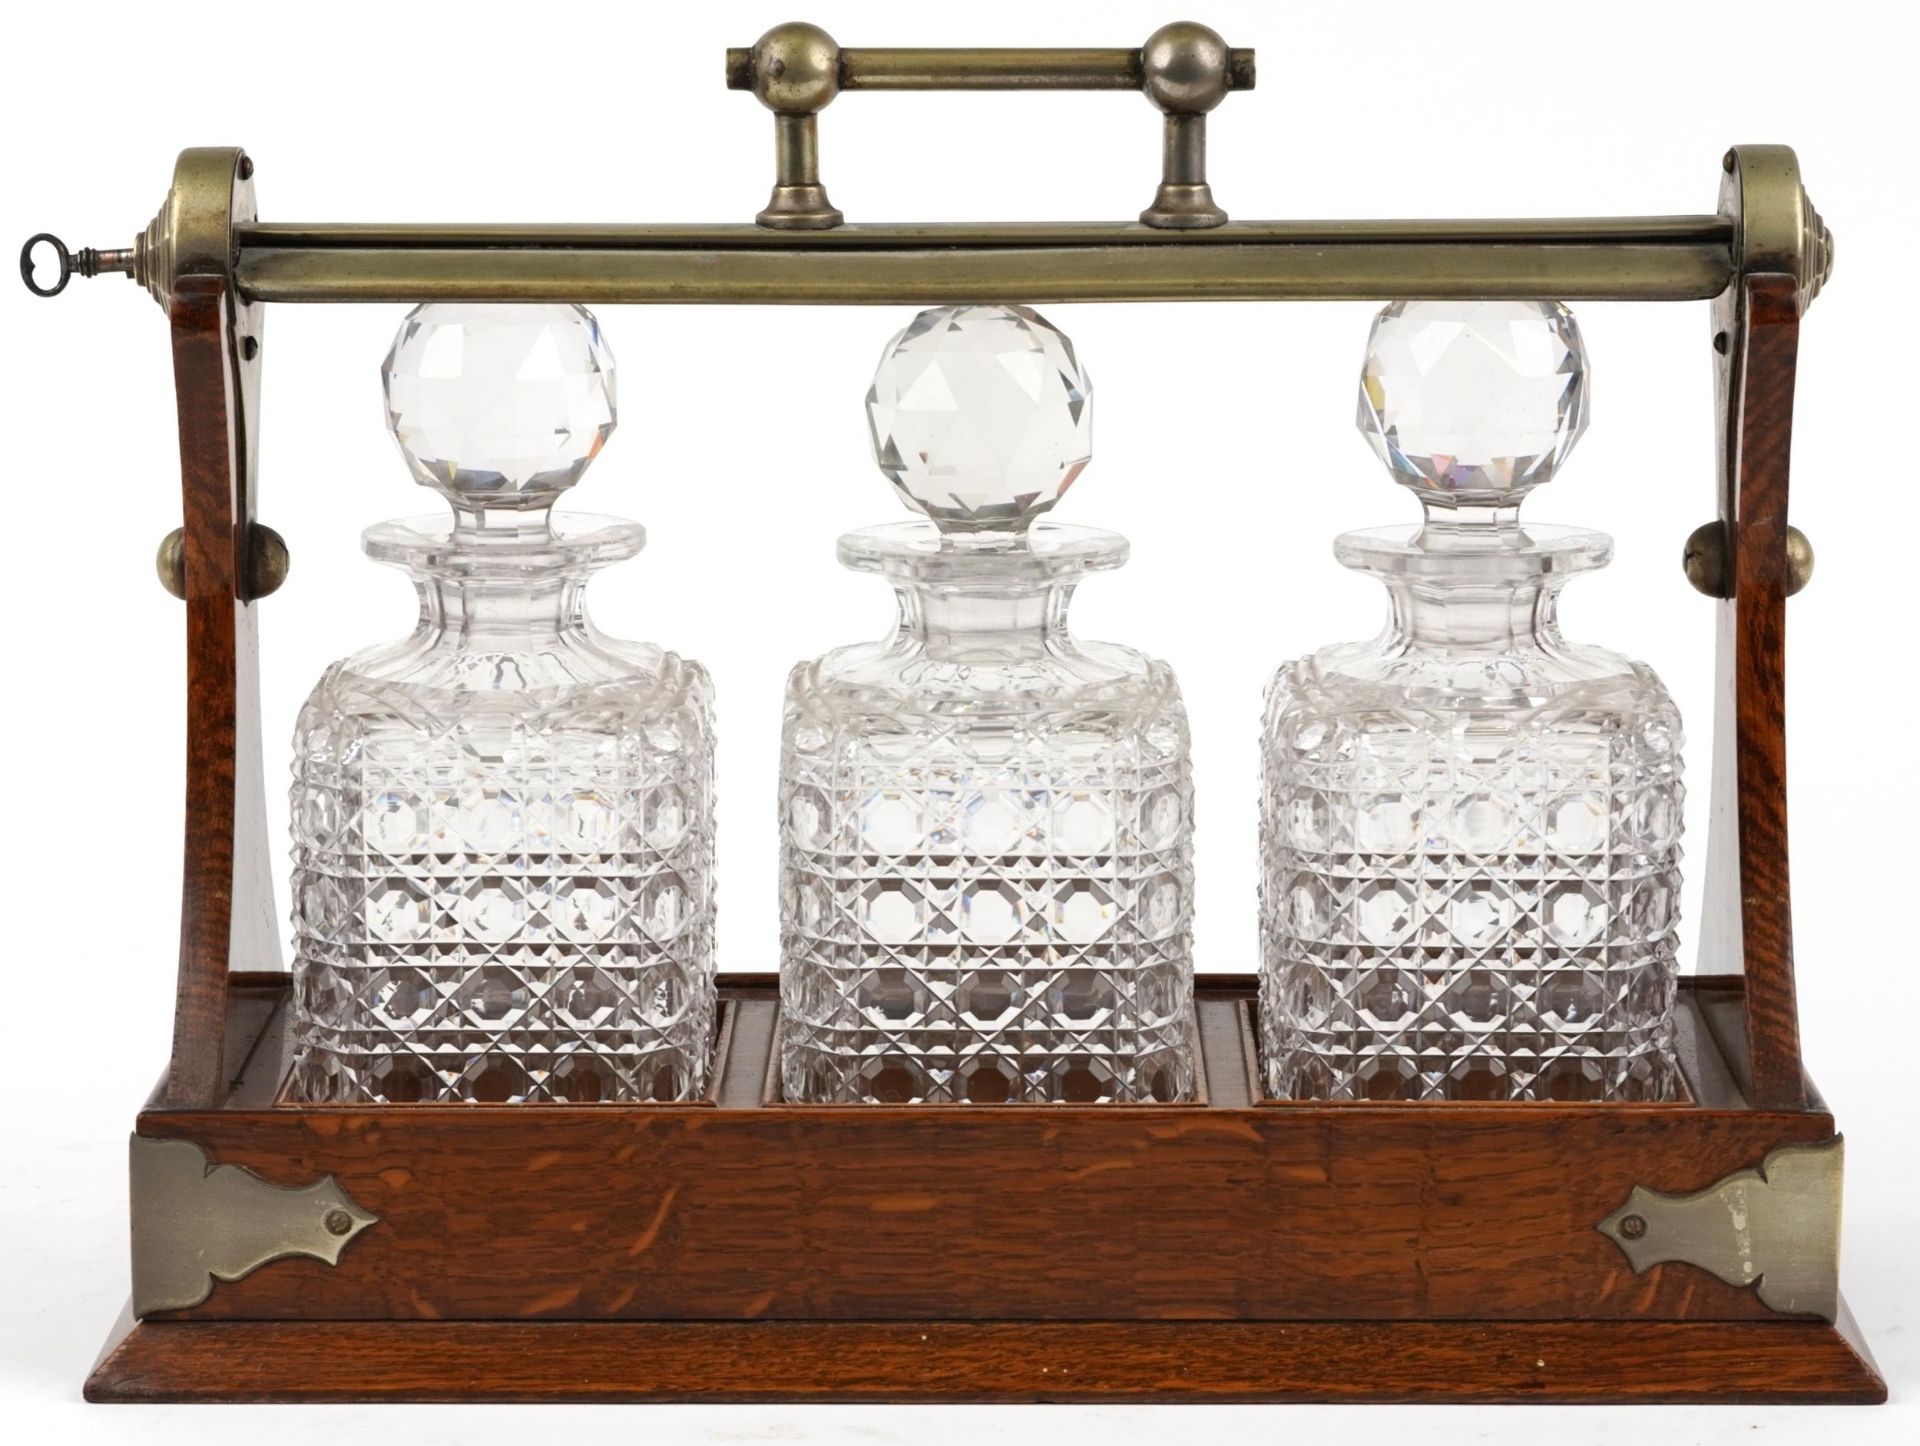 Edwardian oak Grimsell's Patent tantalus housing three cut glass decanters, 40cm wide : For - Image 4 of 5